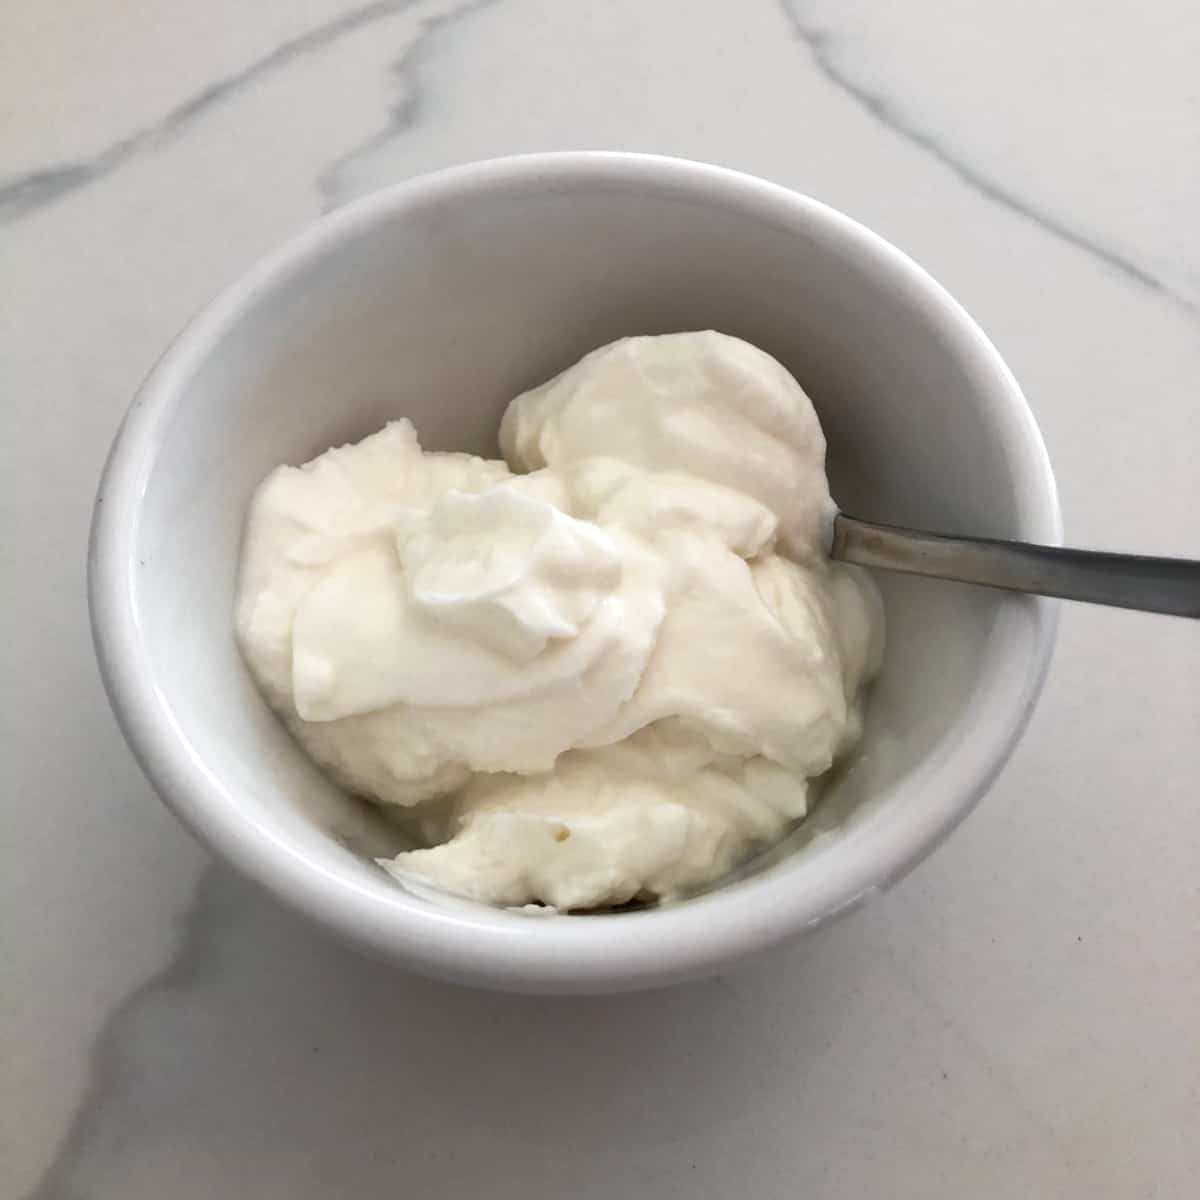 Nonfat Greek yogurt in small white bowl with a spoon on white marble counter.